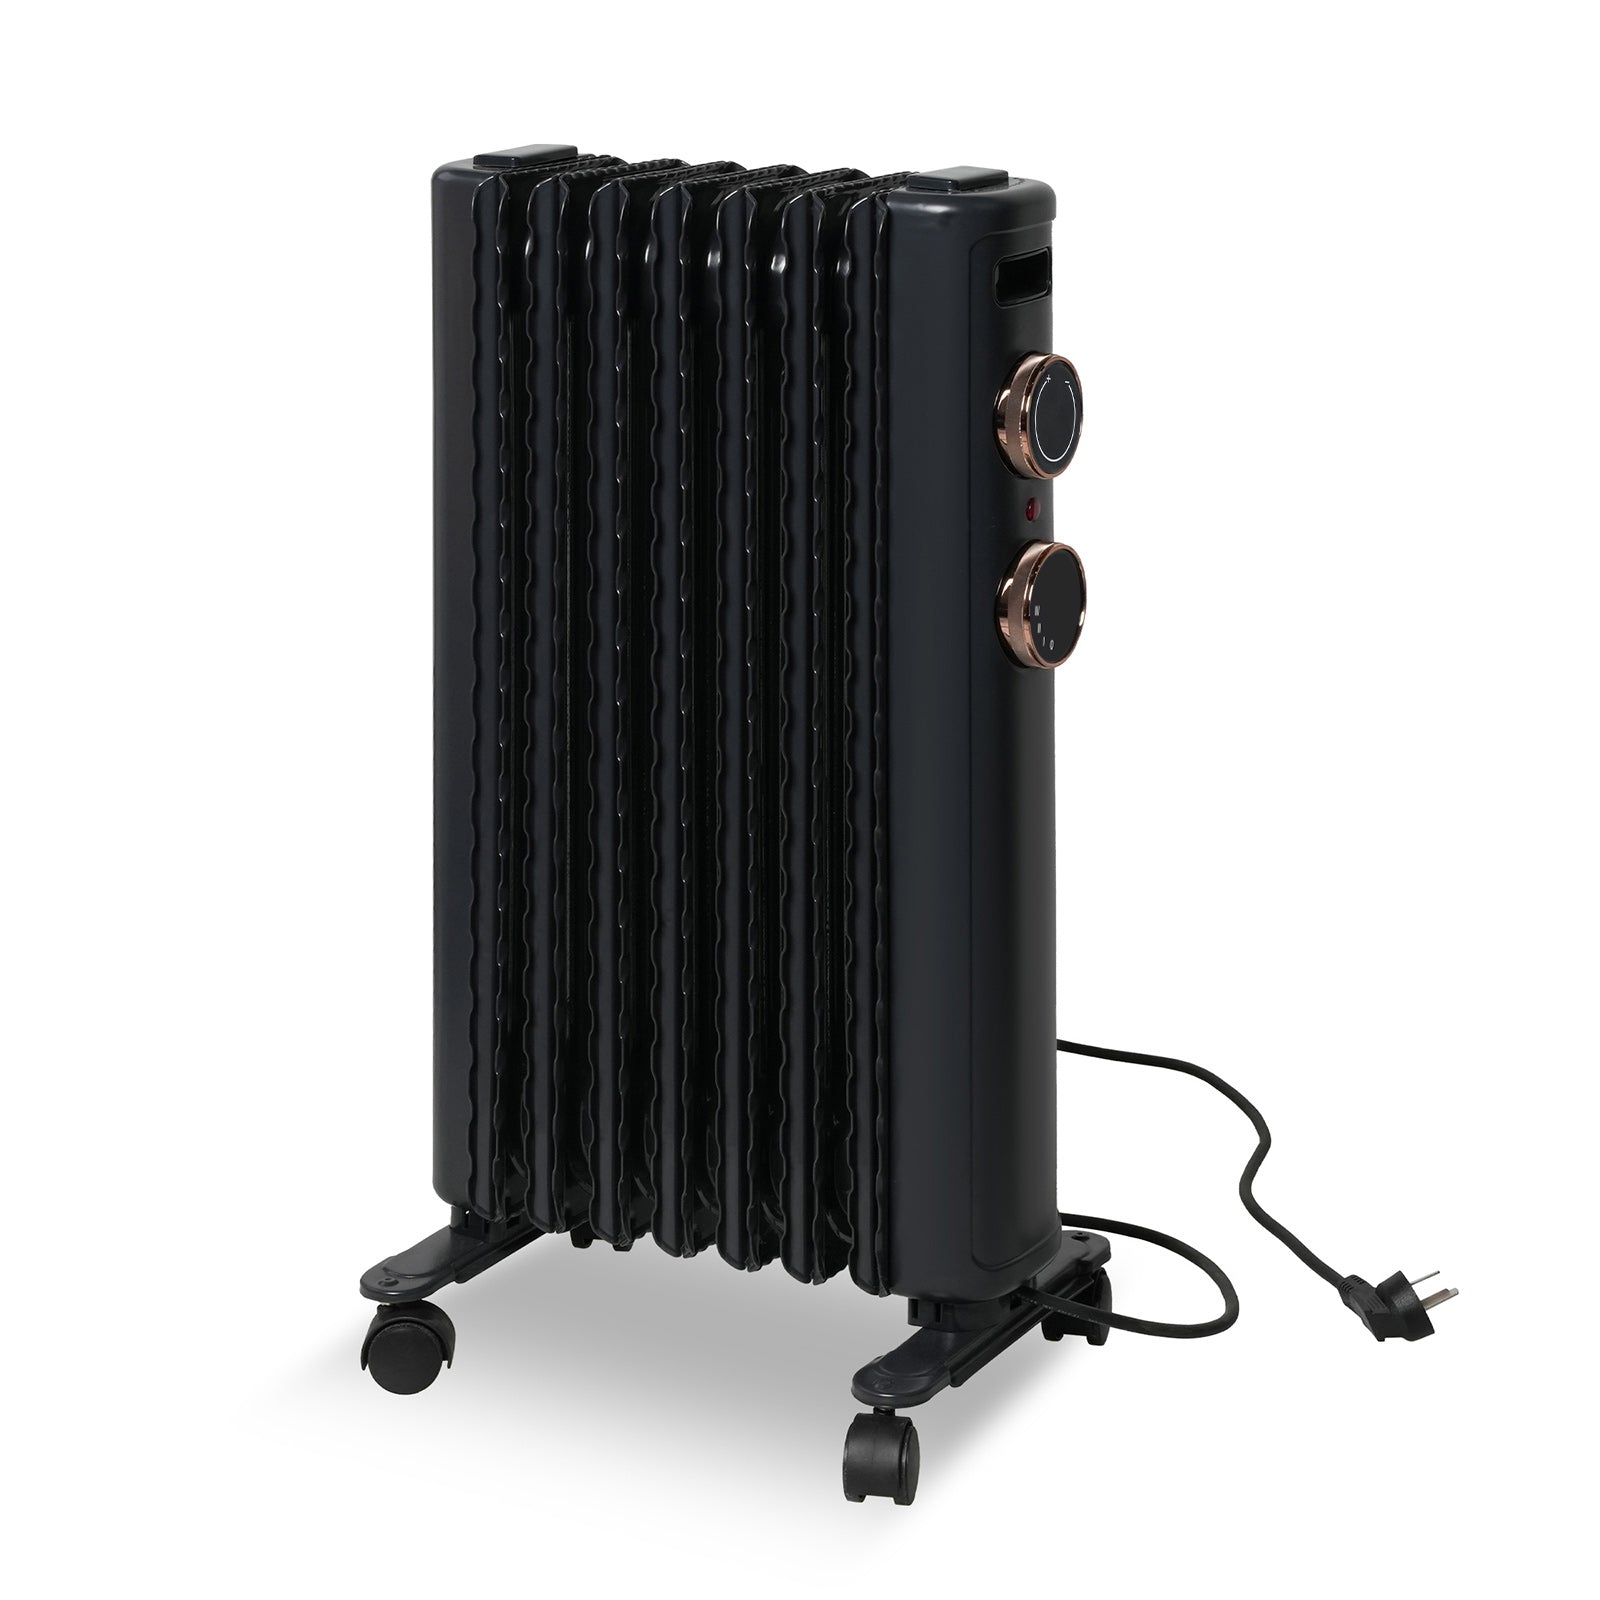 BOSONSHOP 1500W Portable Electric Radiator Oil Filled Heater With 3 Heating Modes, Adjustable Thermostat, Matte Black